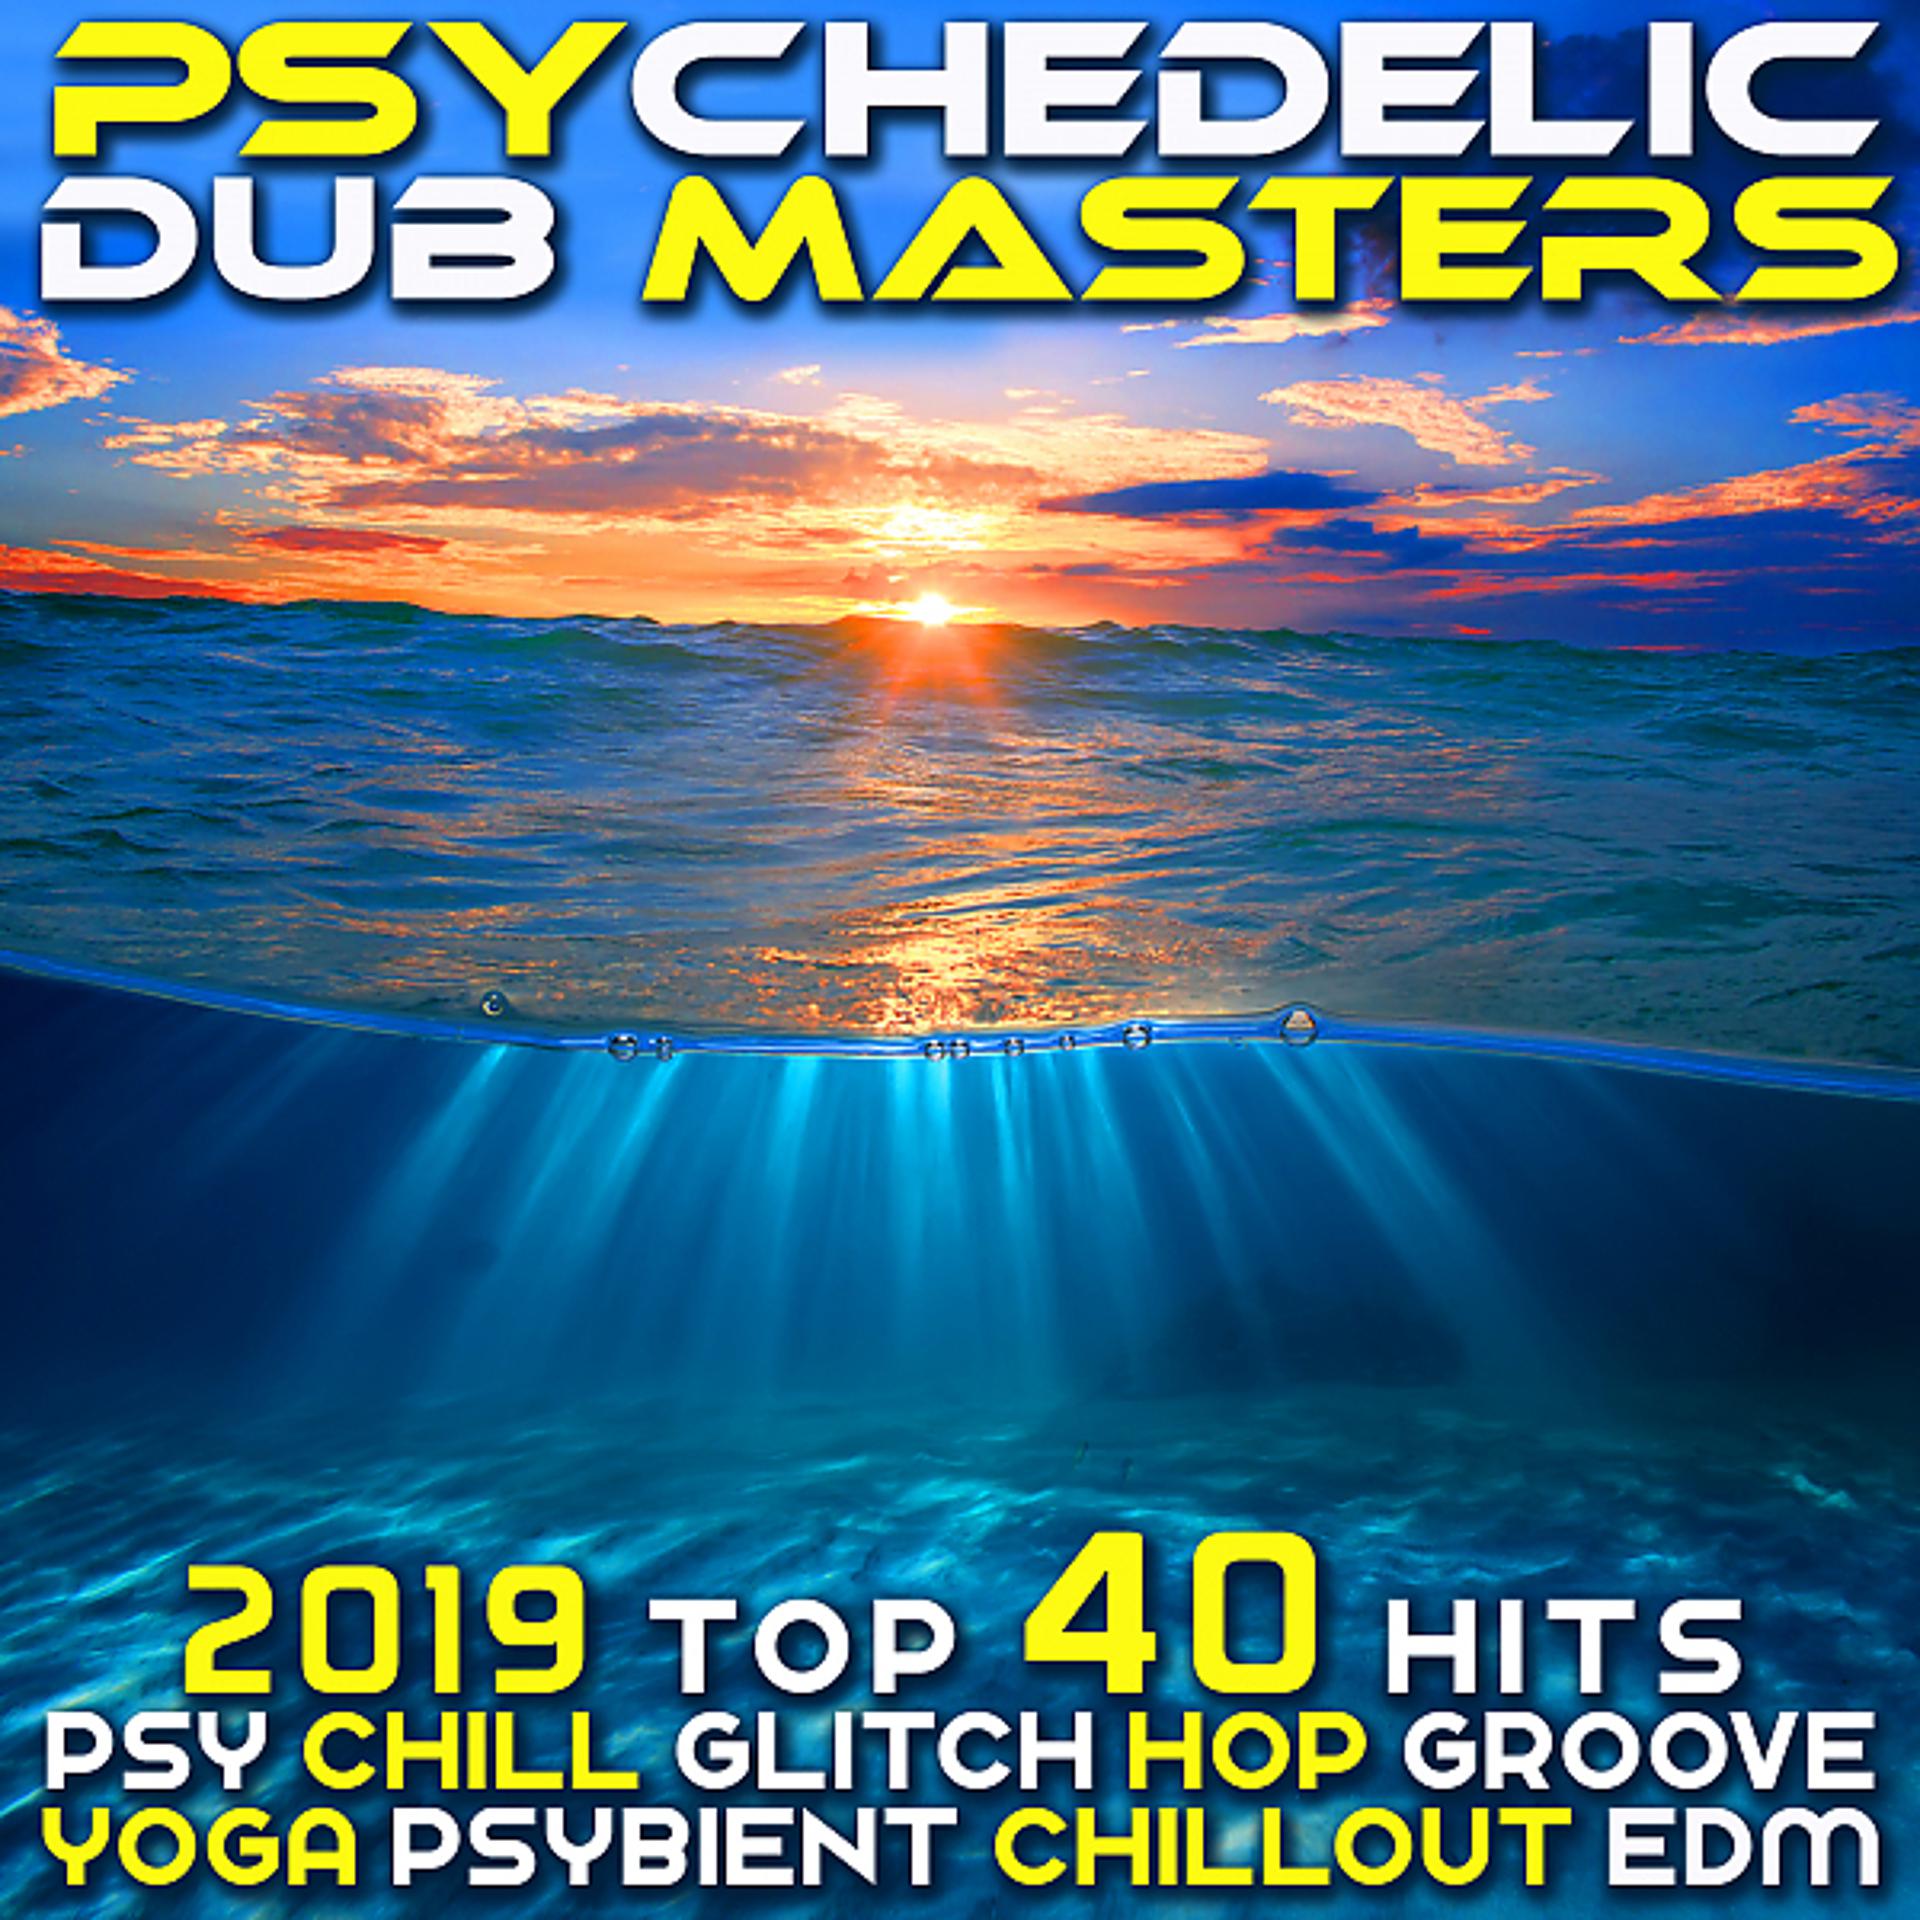 Постер альбома Psychedelic Dub Masters 2019 - Top 40 Hits Psy Chill Glitch Hop Groove Yoga Psybient Chill Out EDM